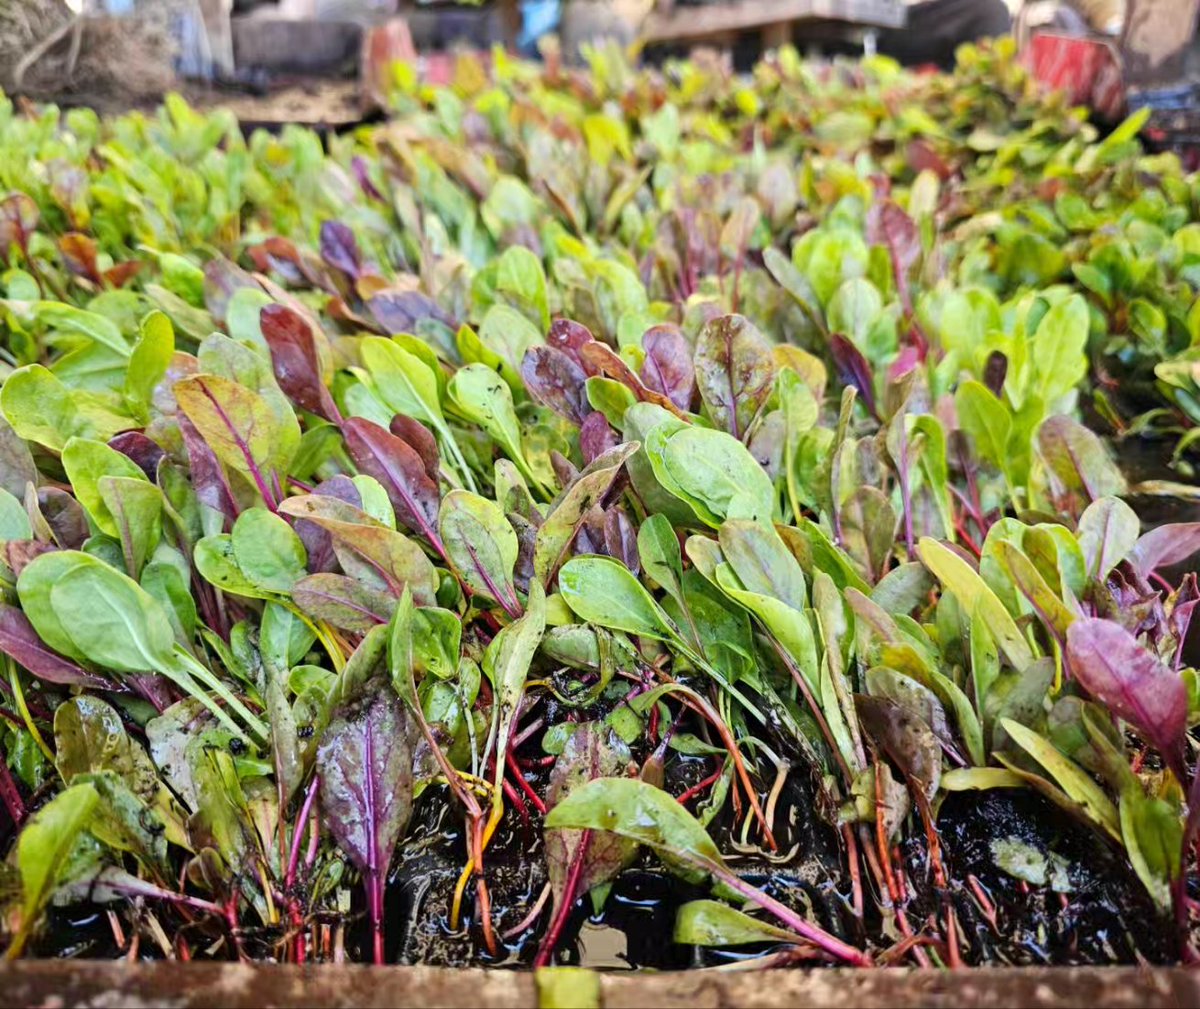 The team is hard at work, transplanting these tiny rainbow chard seedlings in the fields so they can grow up large and luscious!  Exceptionally pretty, they will fill the fields with colour. They grow up so fast 🥲  #FromTheField #Transplanting